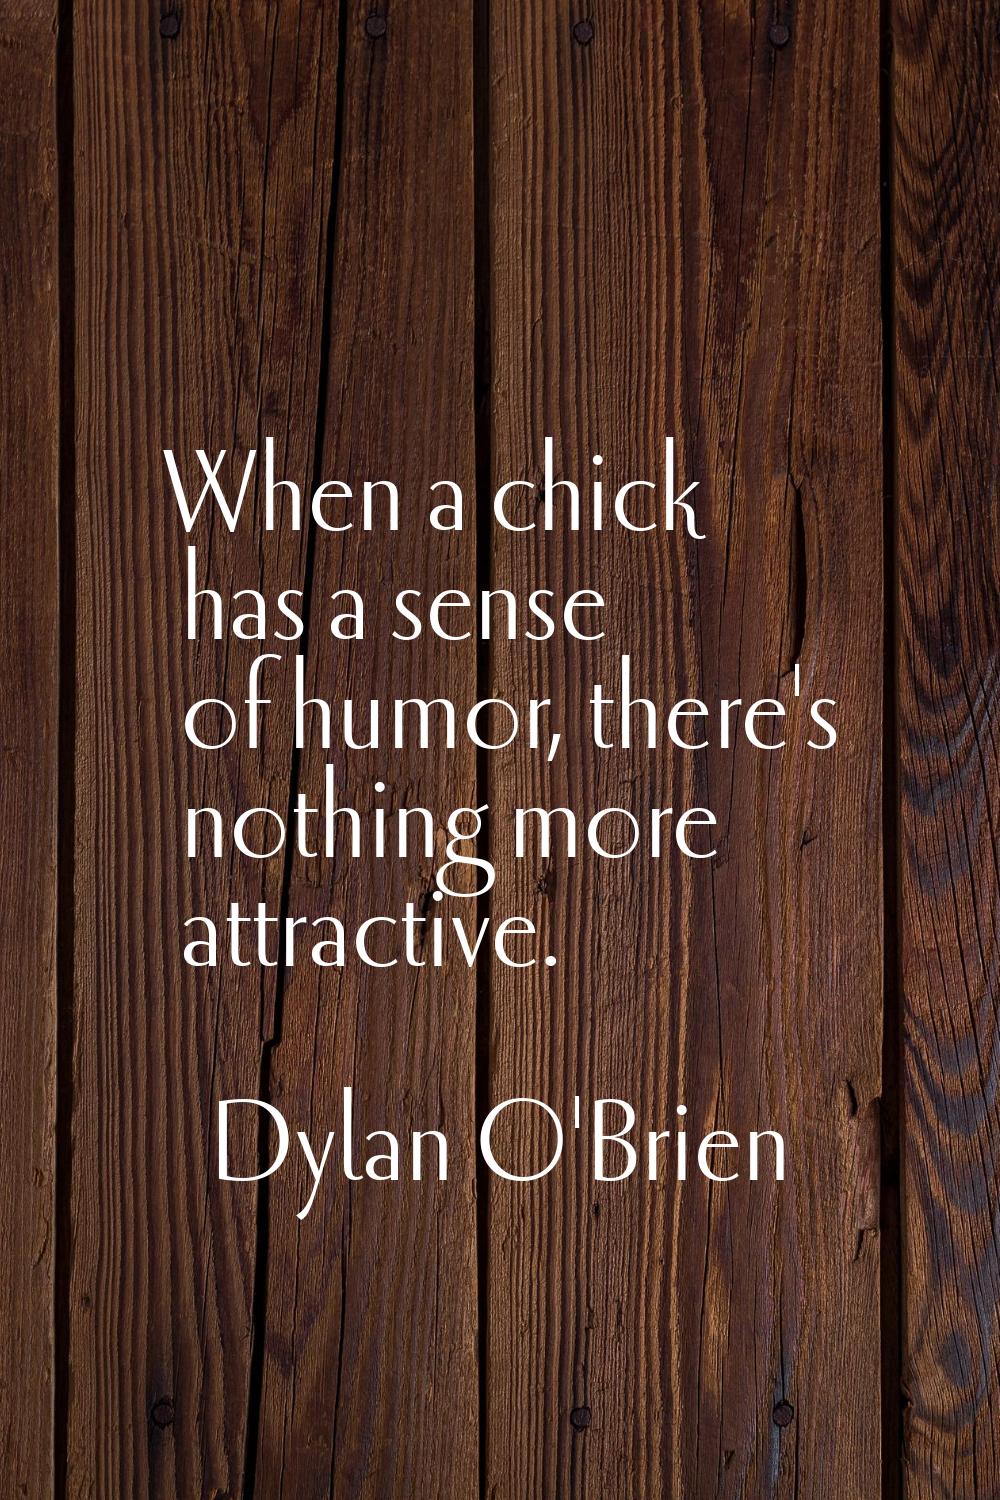 When a chick has a sense of humor, there's nothing more attractive.